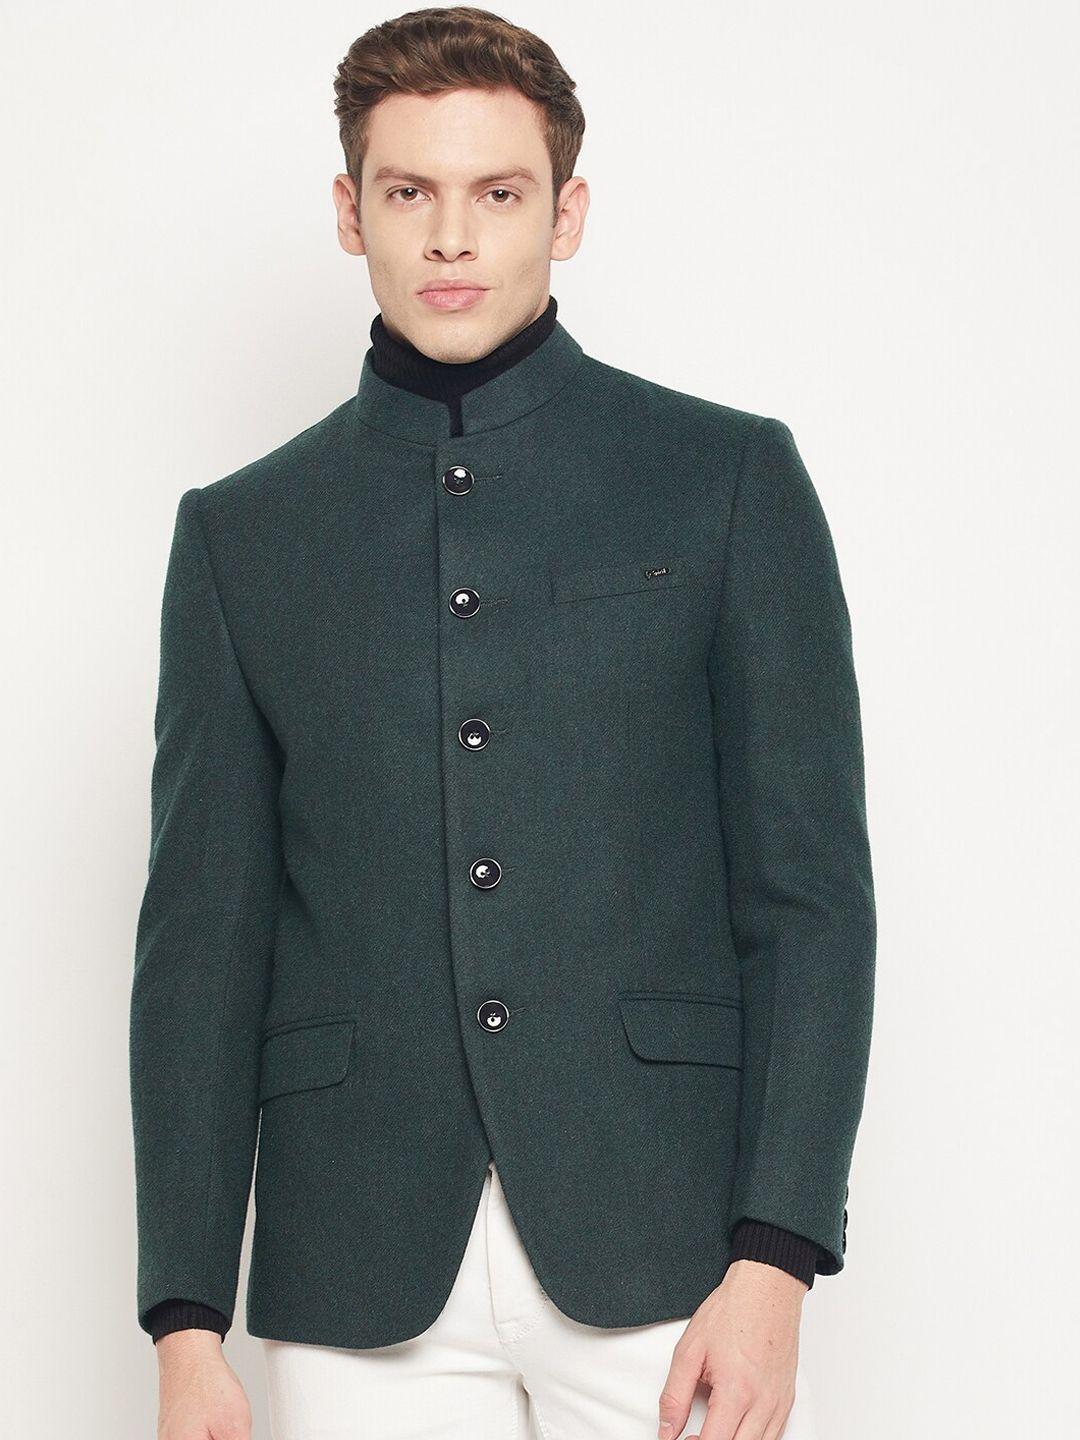 spirit-men-olive-green-colored-solid-bandhgala-pure-wool-formal-blazers